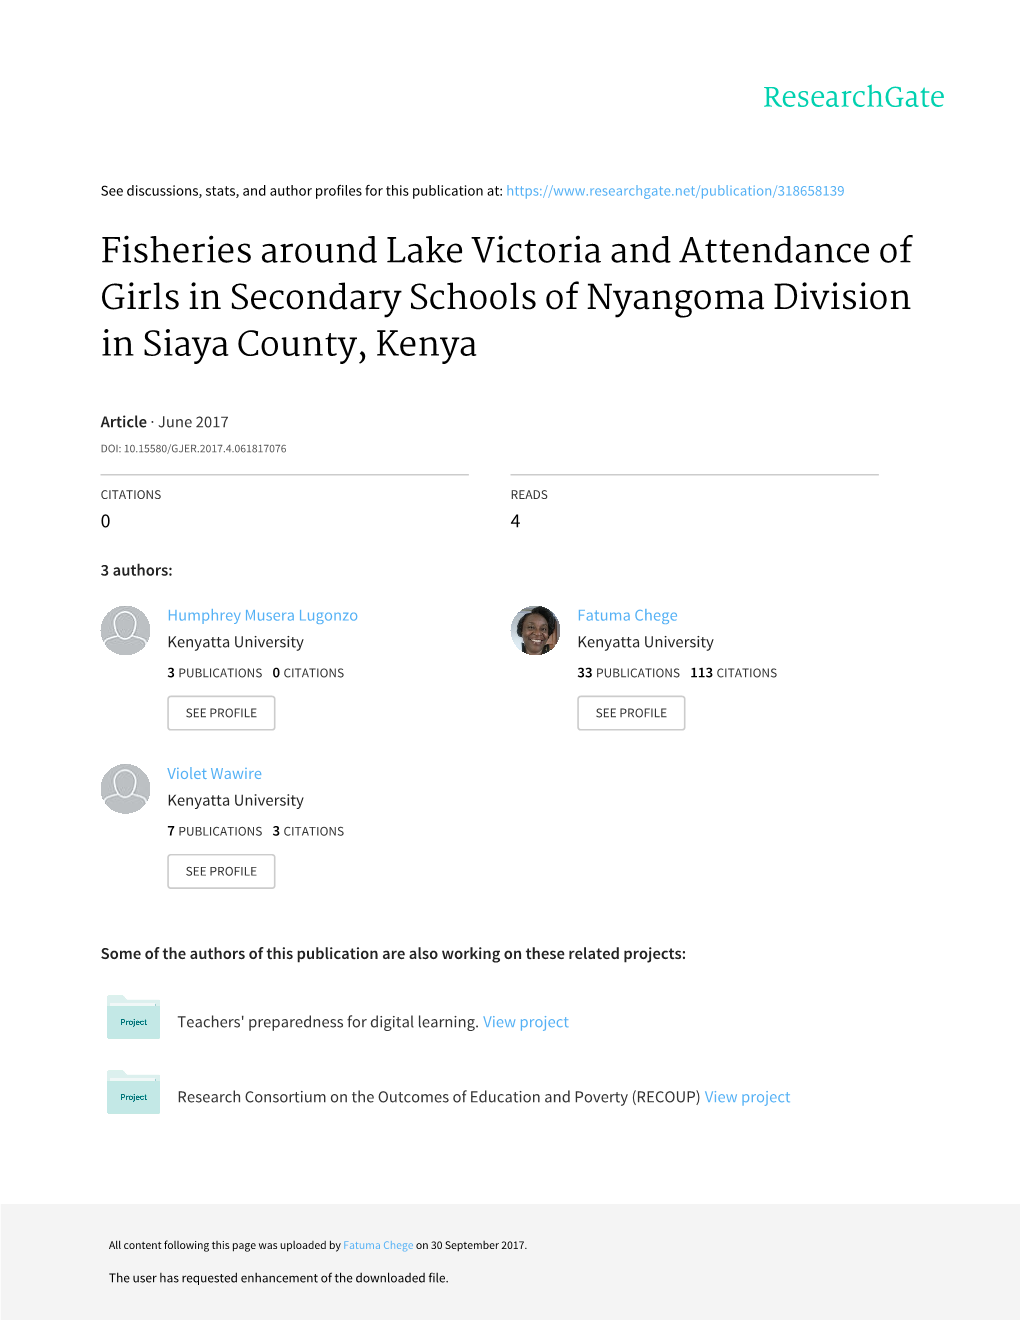 Fisheries Around Lake Victoria and Attendance of Girls in Secondary Schools of Nyangoma Division in Siaya County, Kenya